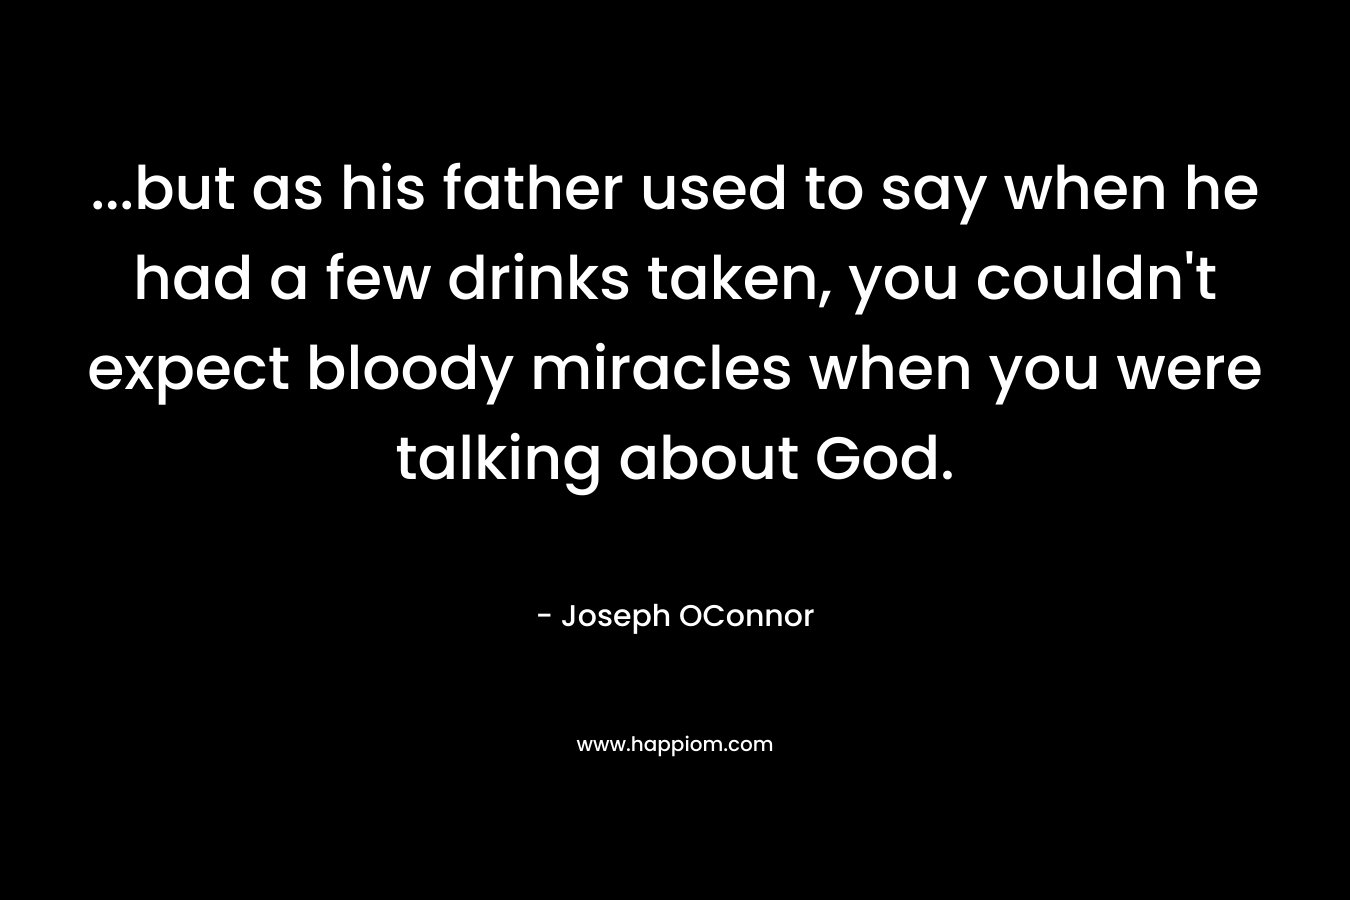 …but as his father used to say when he had a few drinks taken, you couldn’t expect bloody miracles when you were talking about God. – Joseph OConnor